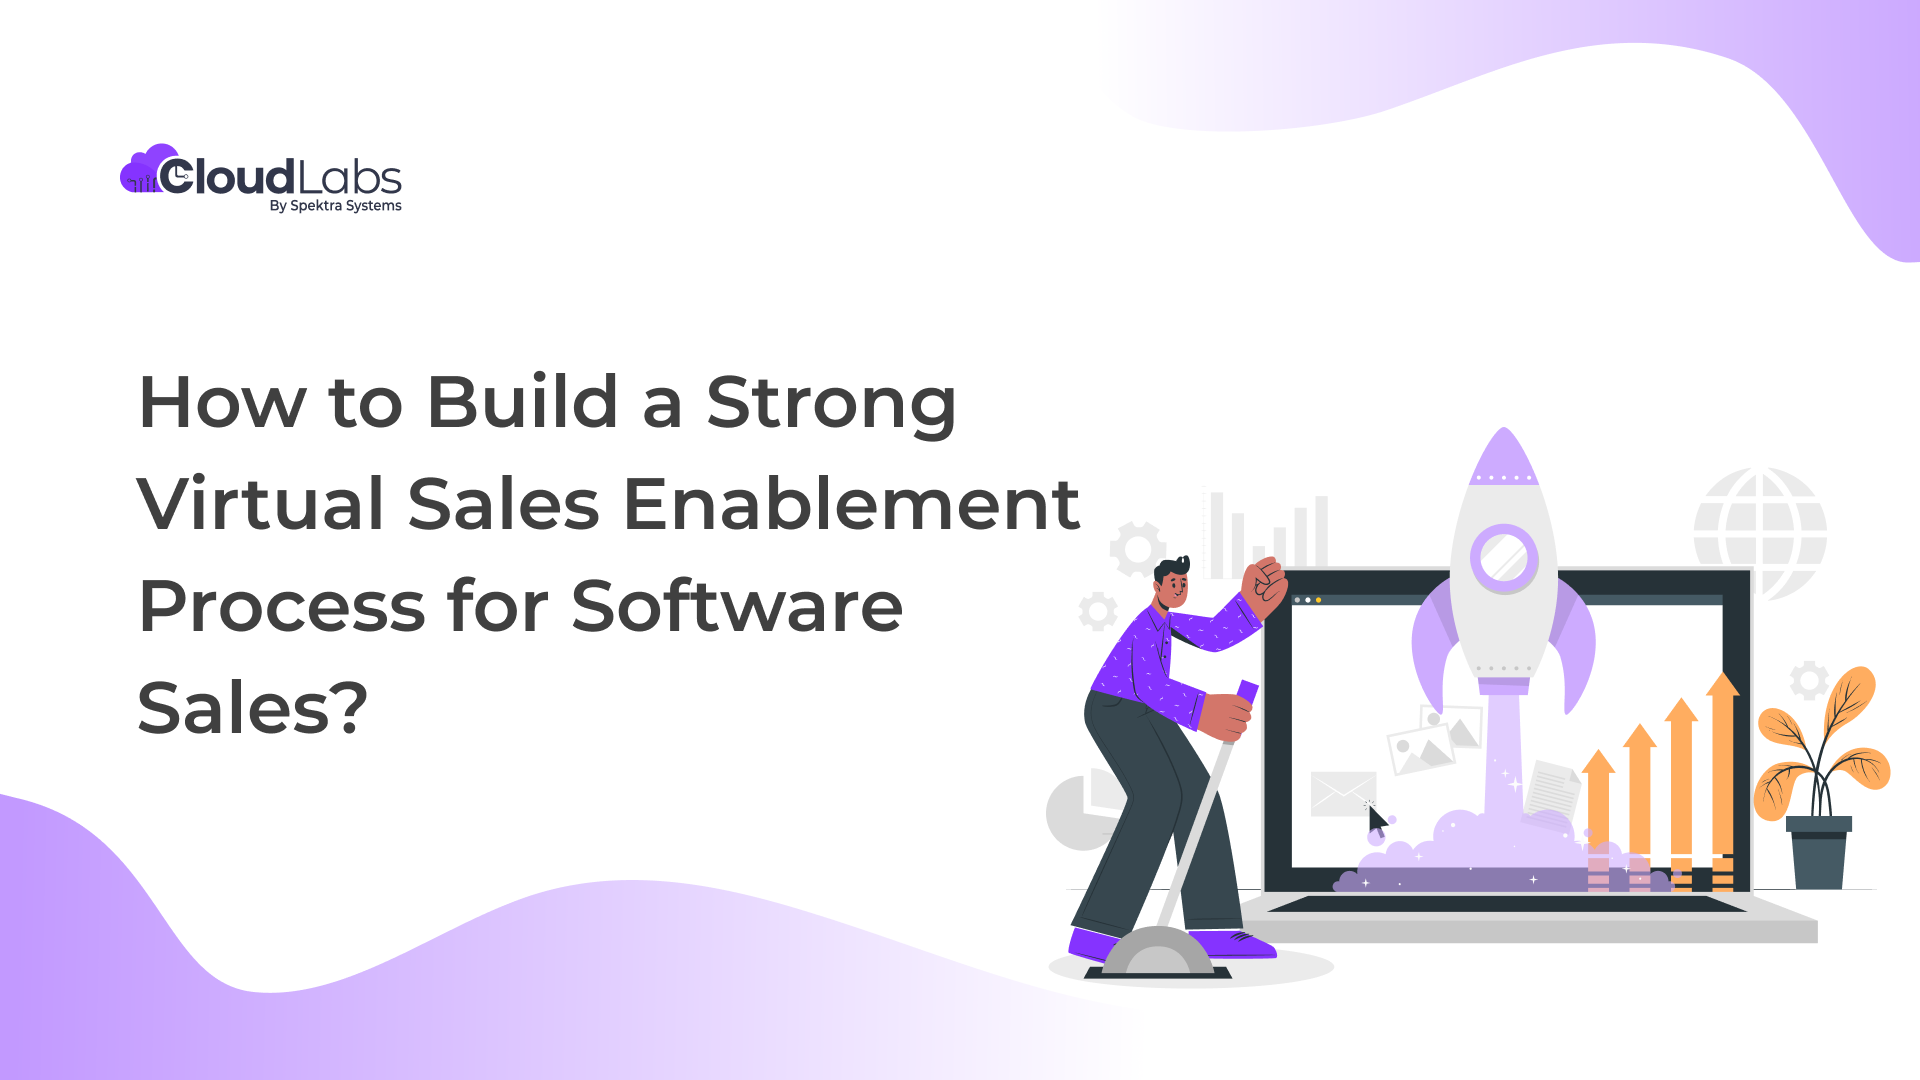 How to Build a Strong Virtual Sales Enablement Process for Software Sales?